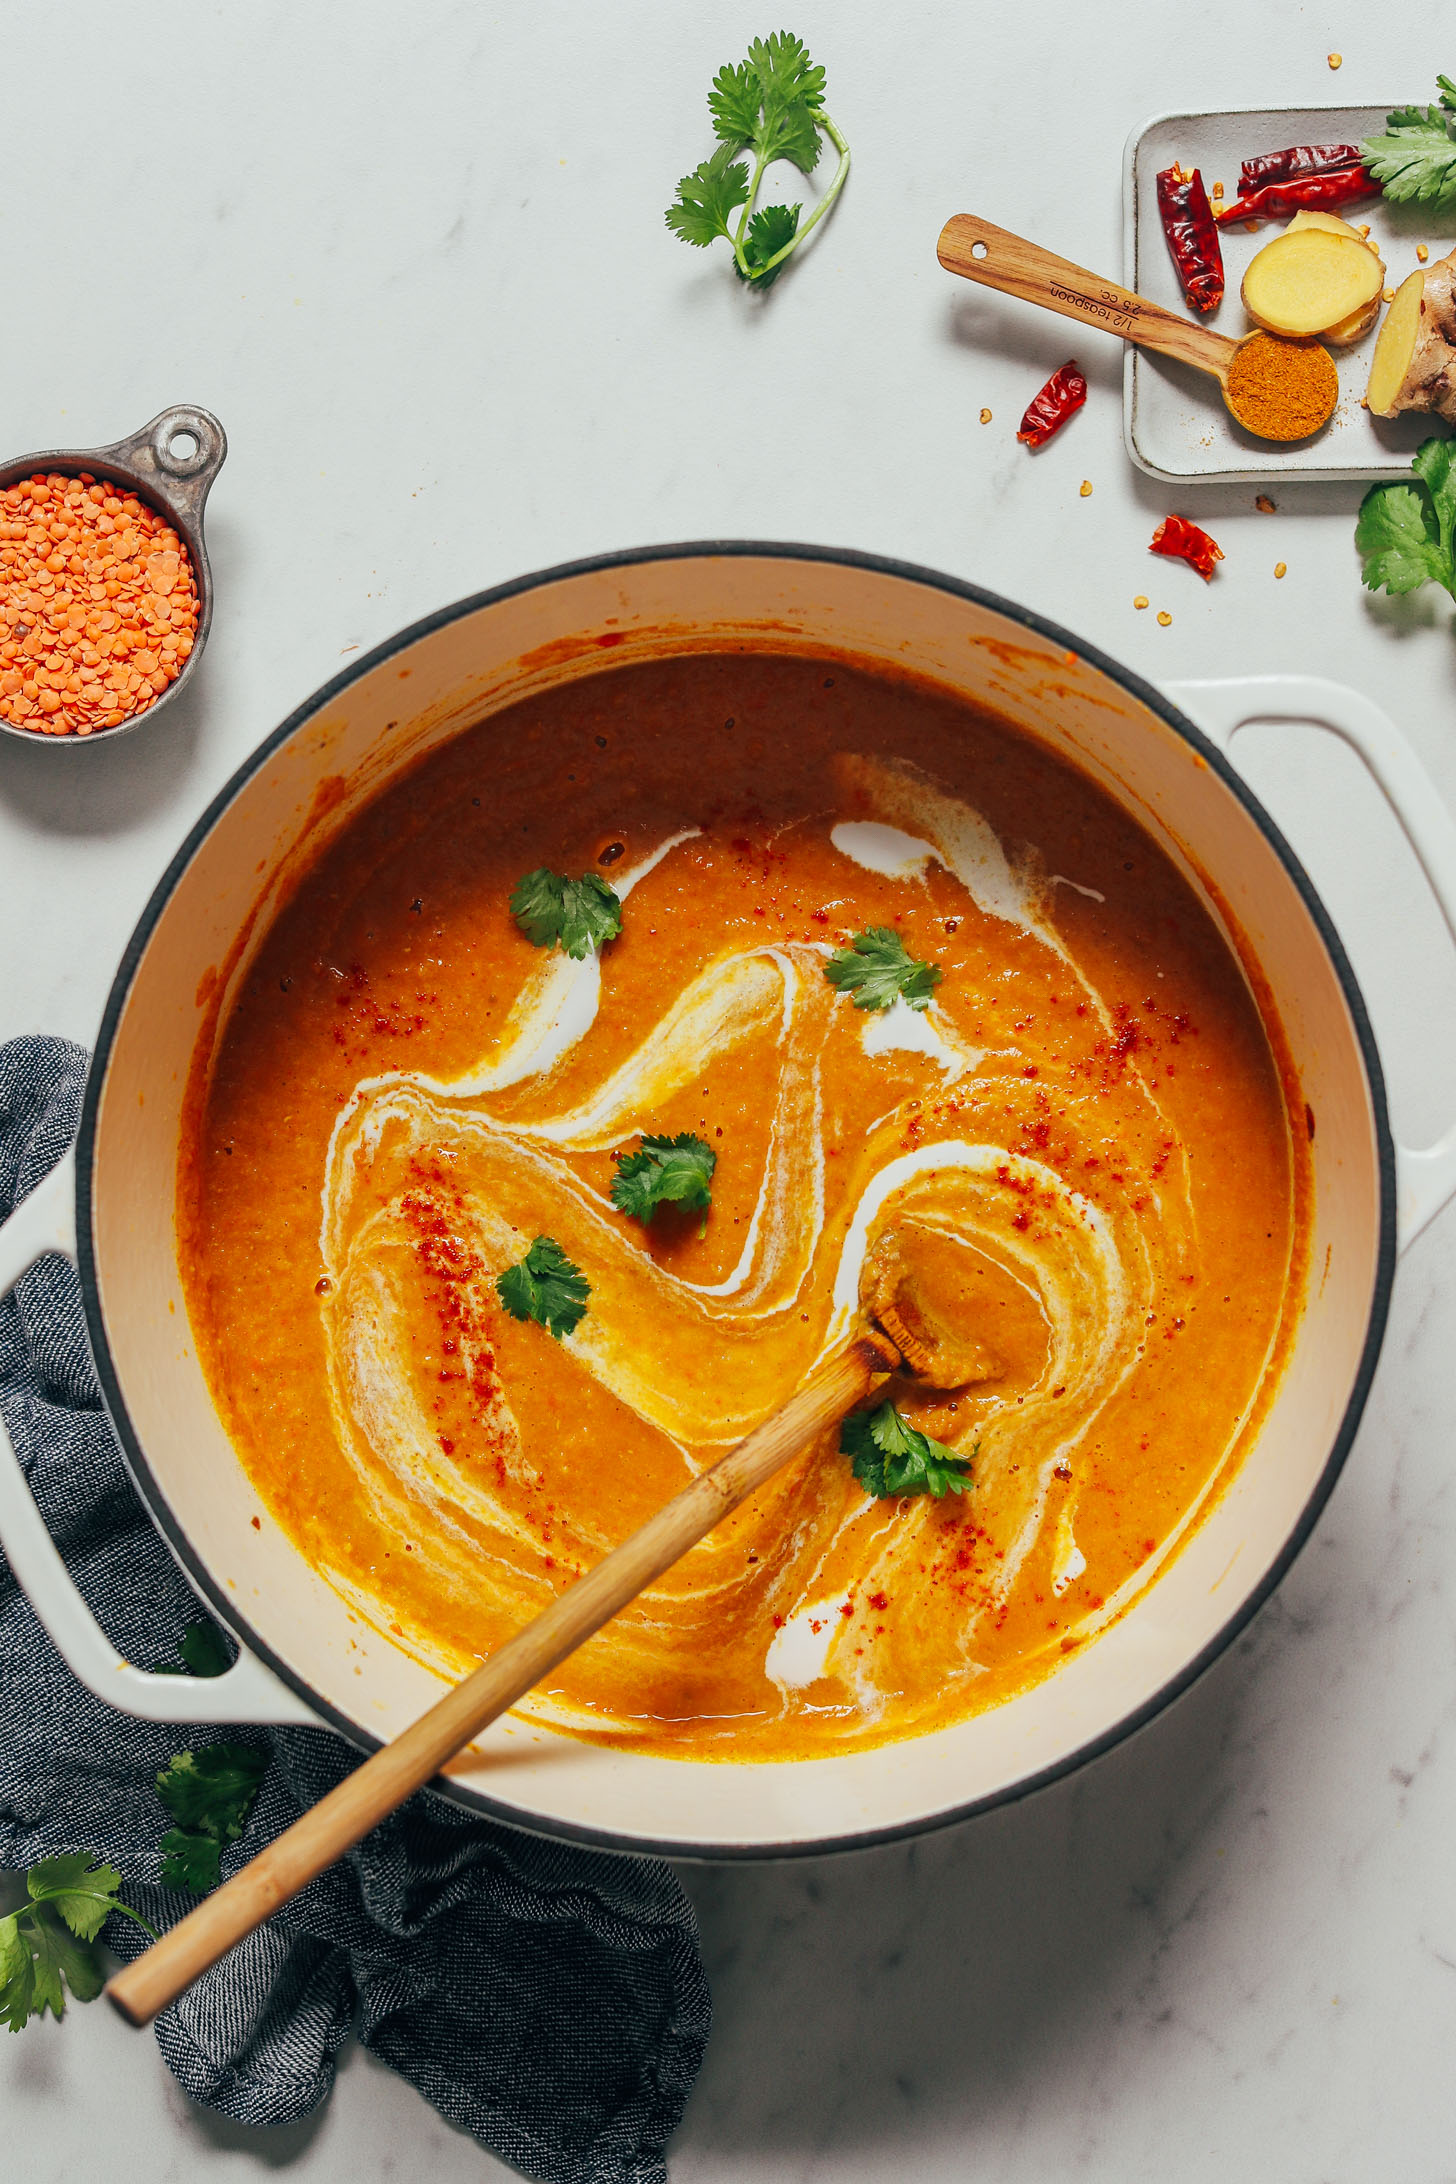 Pot of Curried Cauliflower Lentil Soup with a swirl of coconut milk